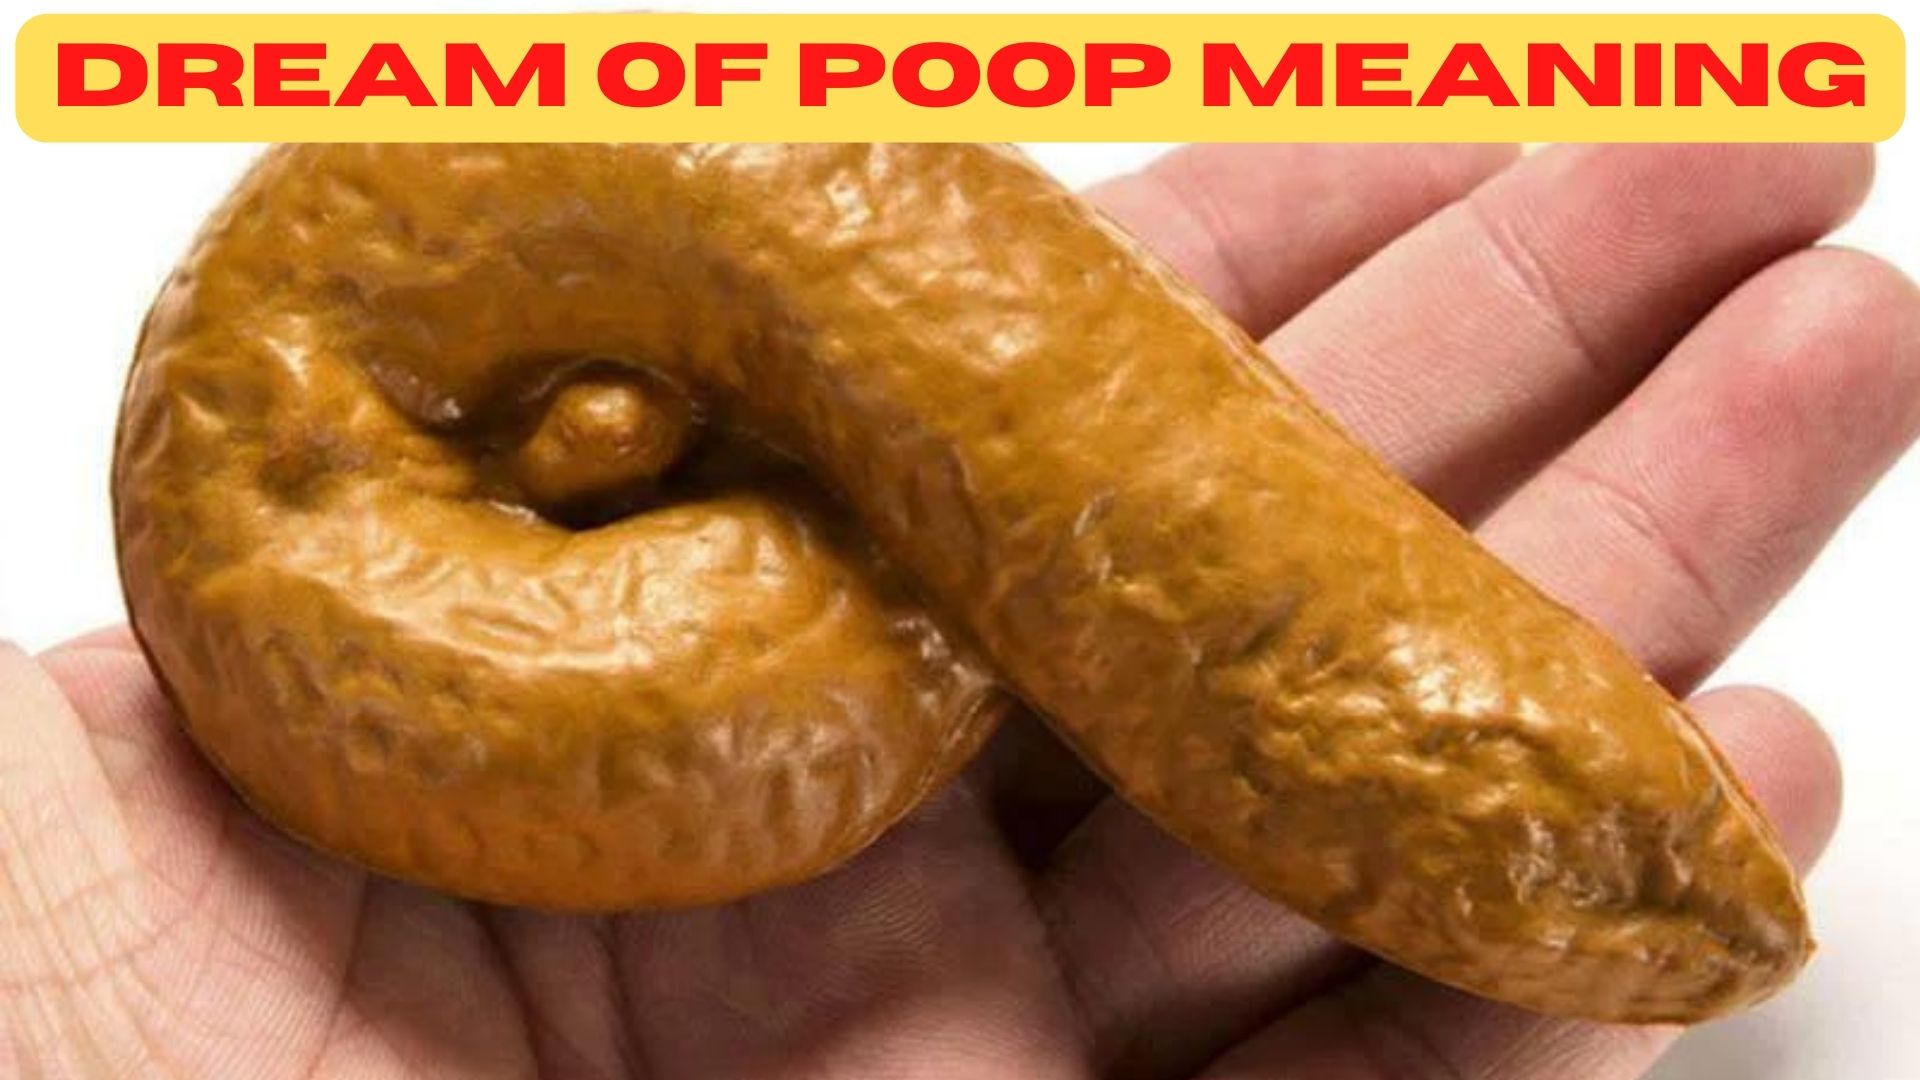 Dream Of Poop Meaning - A Sign Of Good Luck And Prosperity